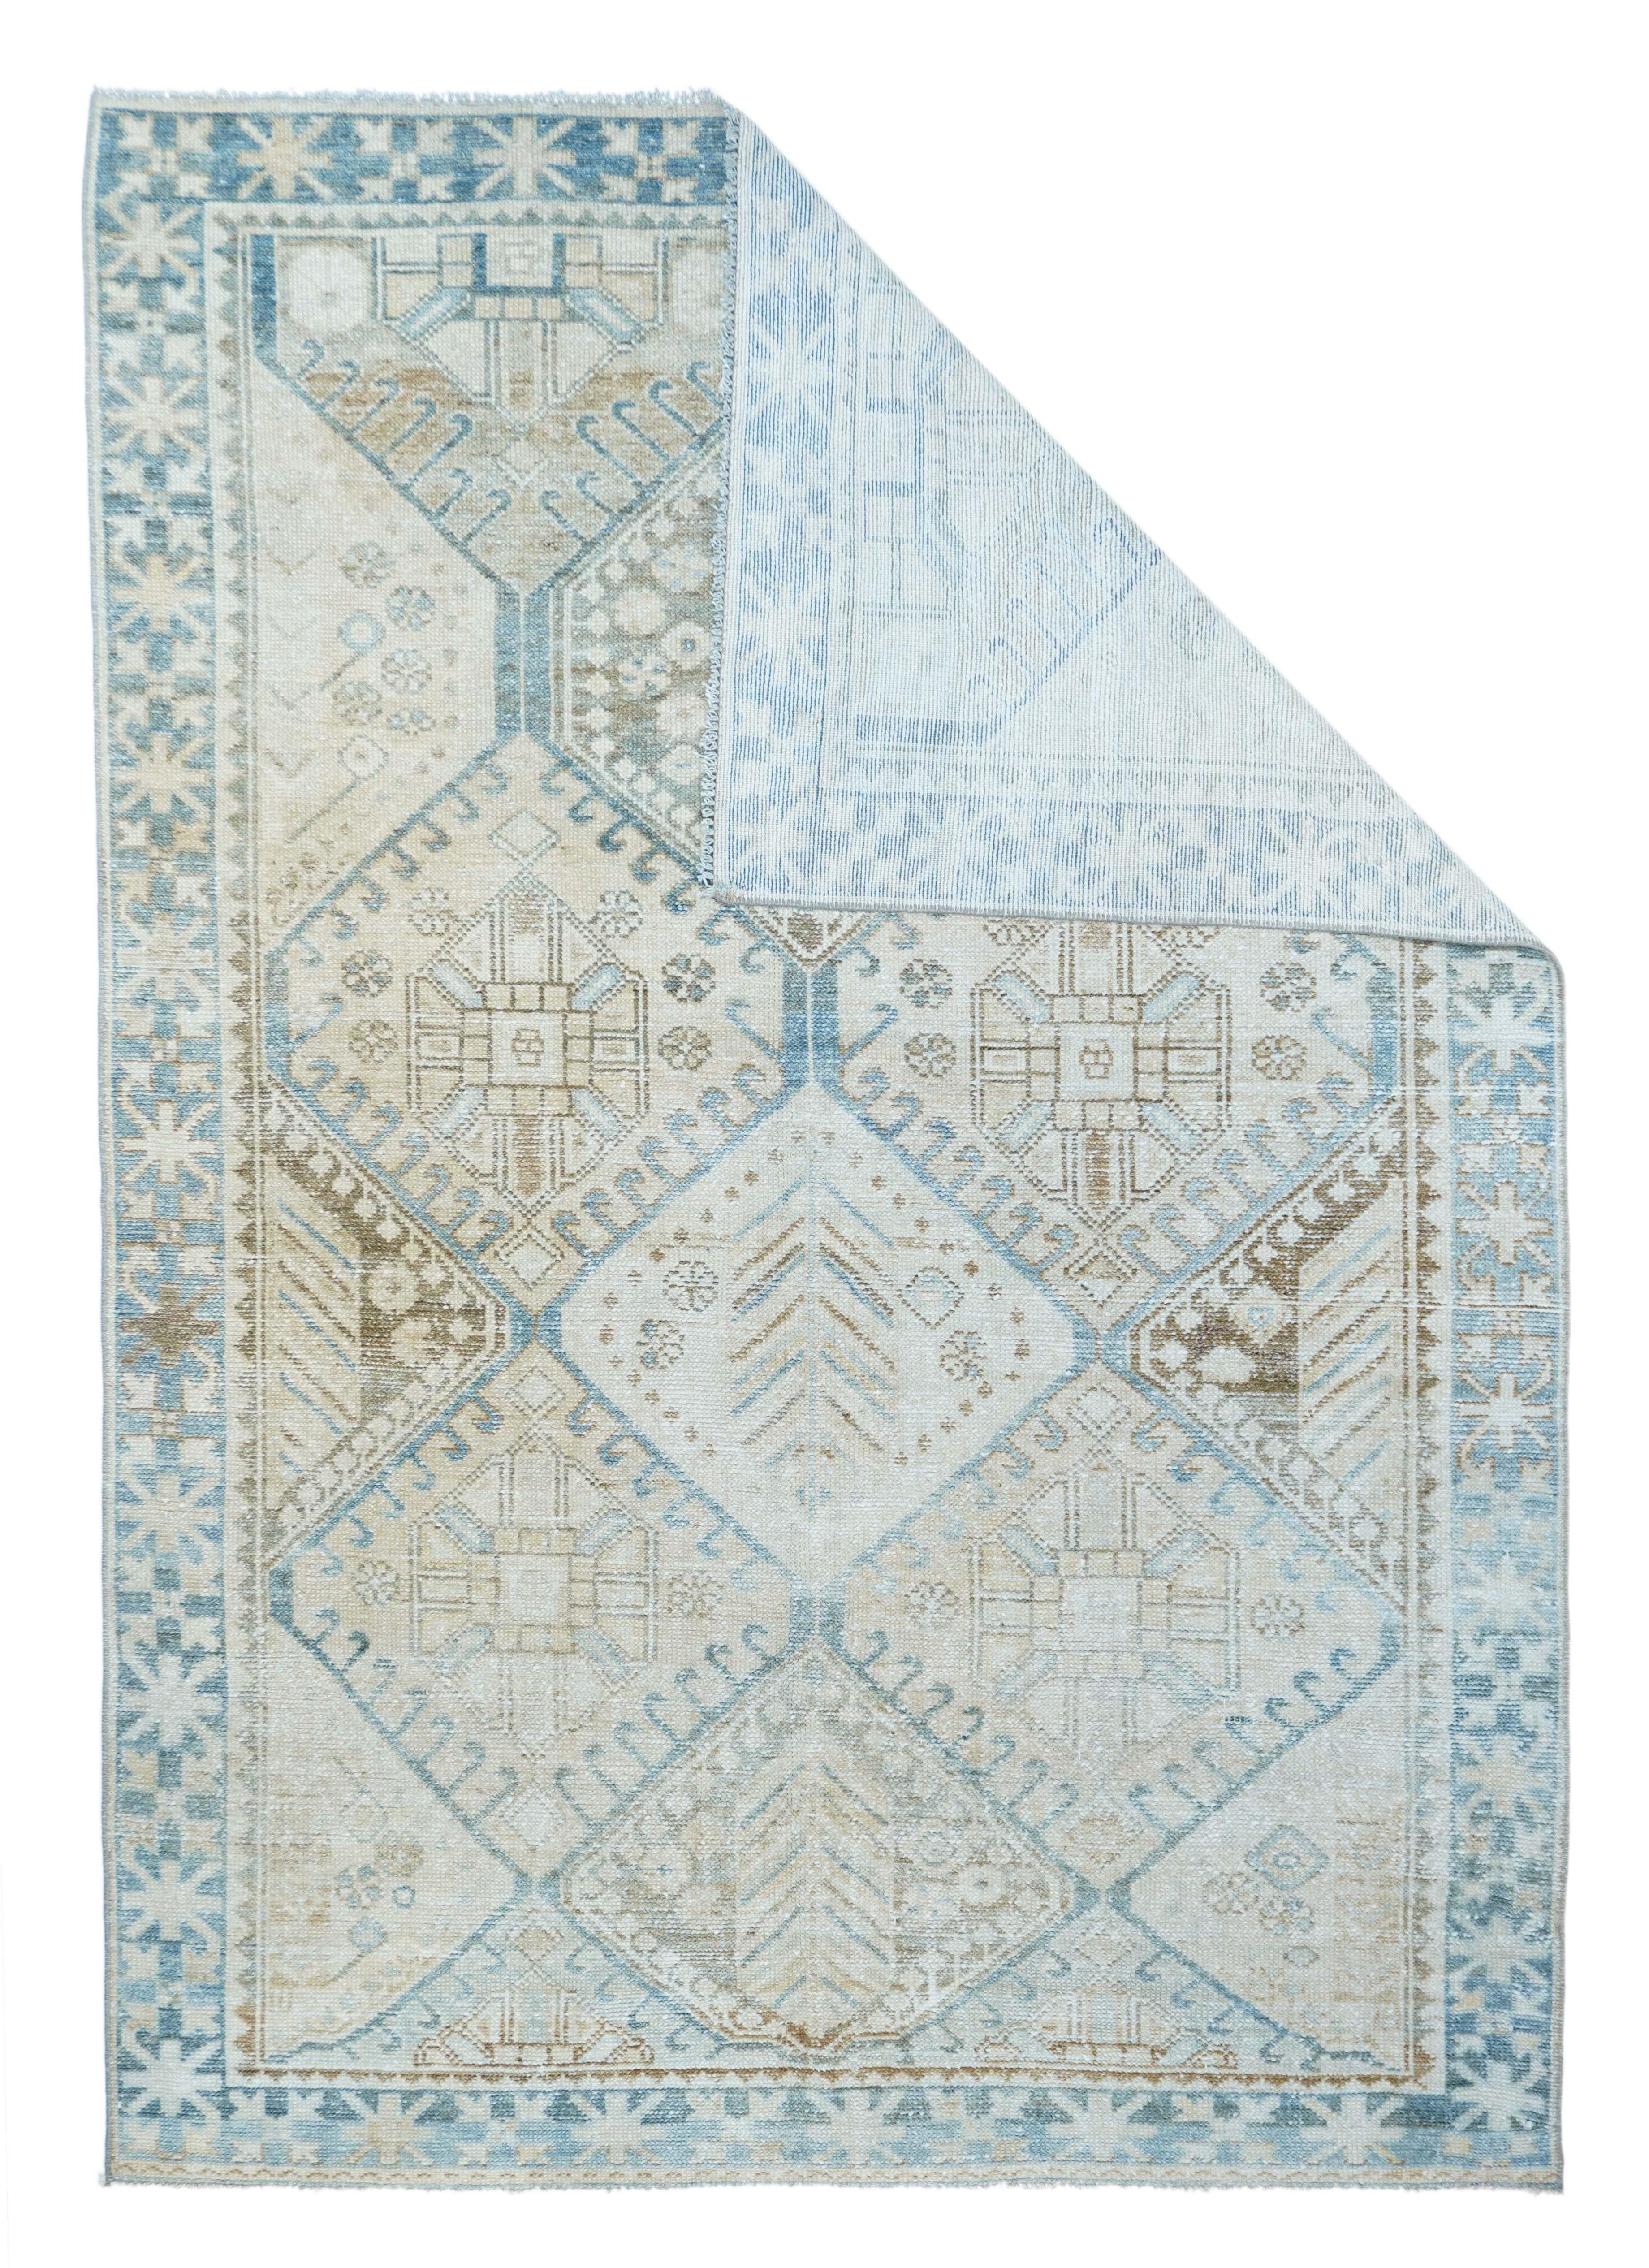 In a much reduced palette instead of the usual saturated one, this Chahar Mahal district village scatter presents a large, allover hooked hexagon design in cream, rust and straw, with feathers or abstract four palmette crosses within. Abrashed light